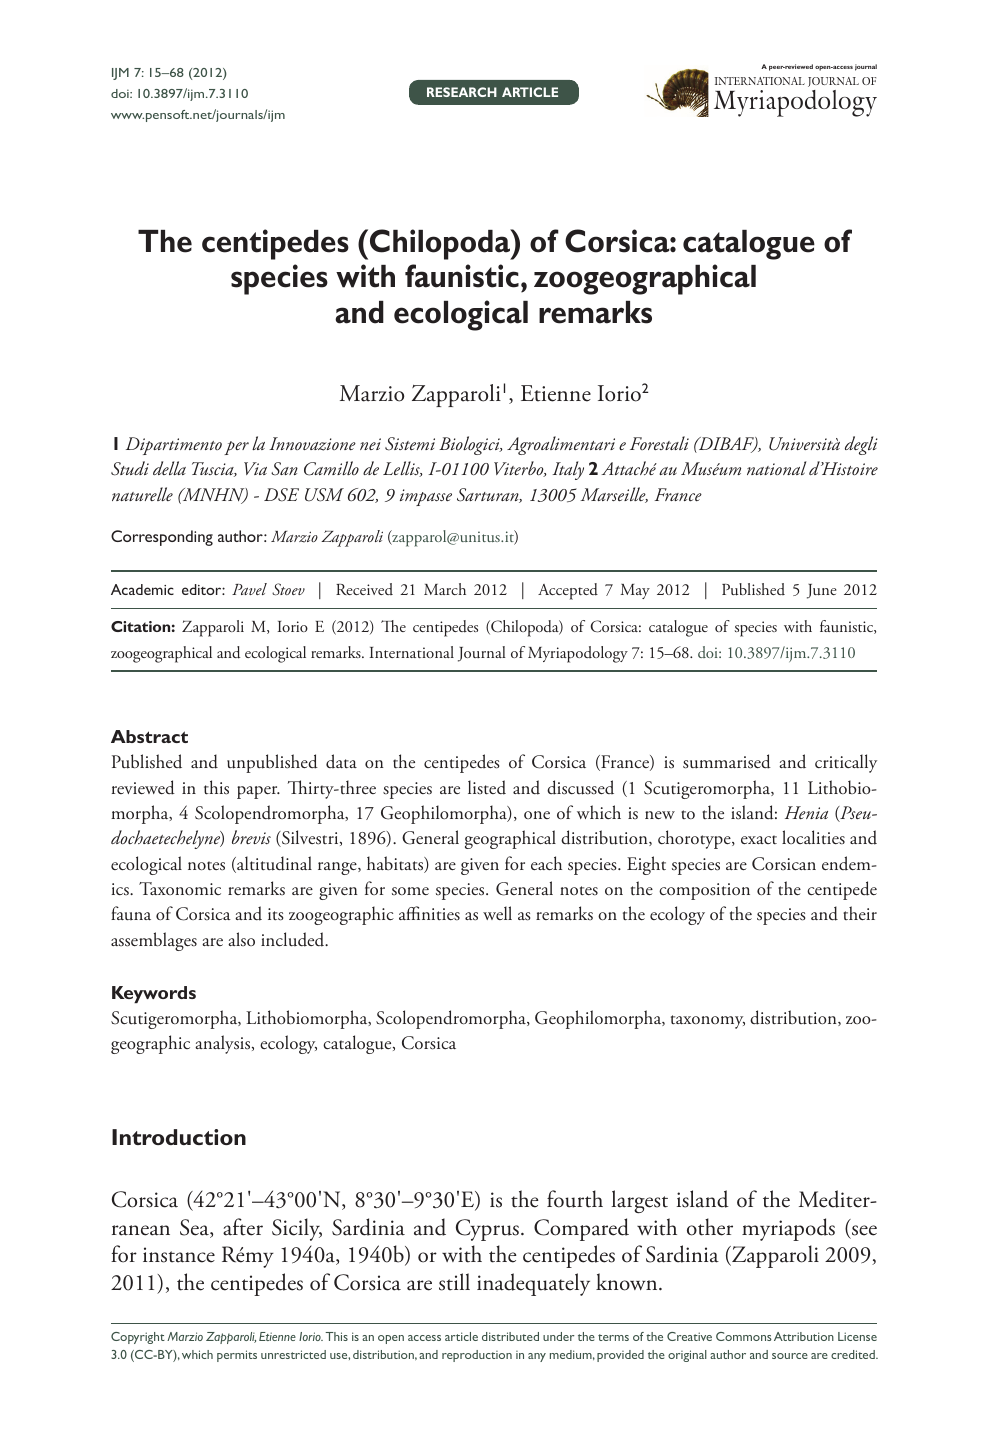 The Centipedes Chilopoda Of Corsica Catalogue Of Species With Faunistic Zoogeographical And Ecological Remarks Topic Of Research Paper In Biological Sciences Download Scholarly Article Pdf And Read For Free On Cyberleninka